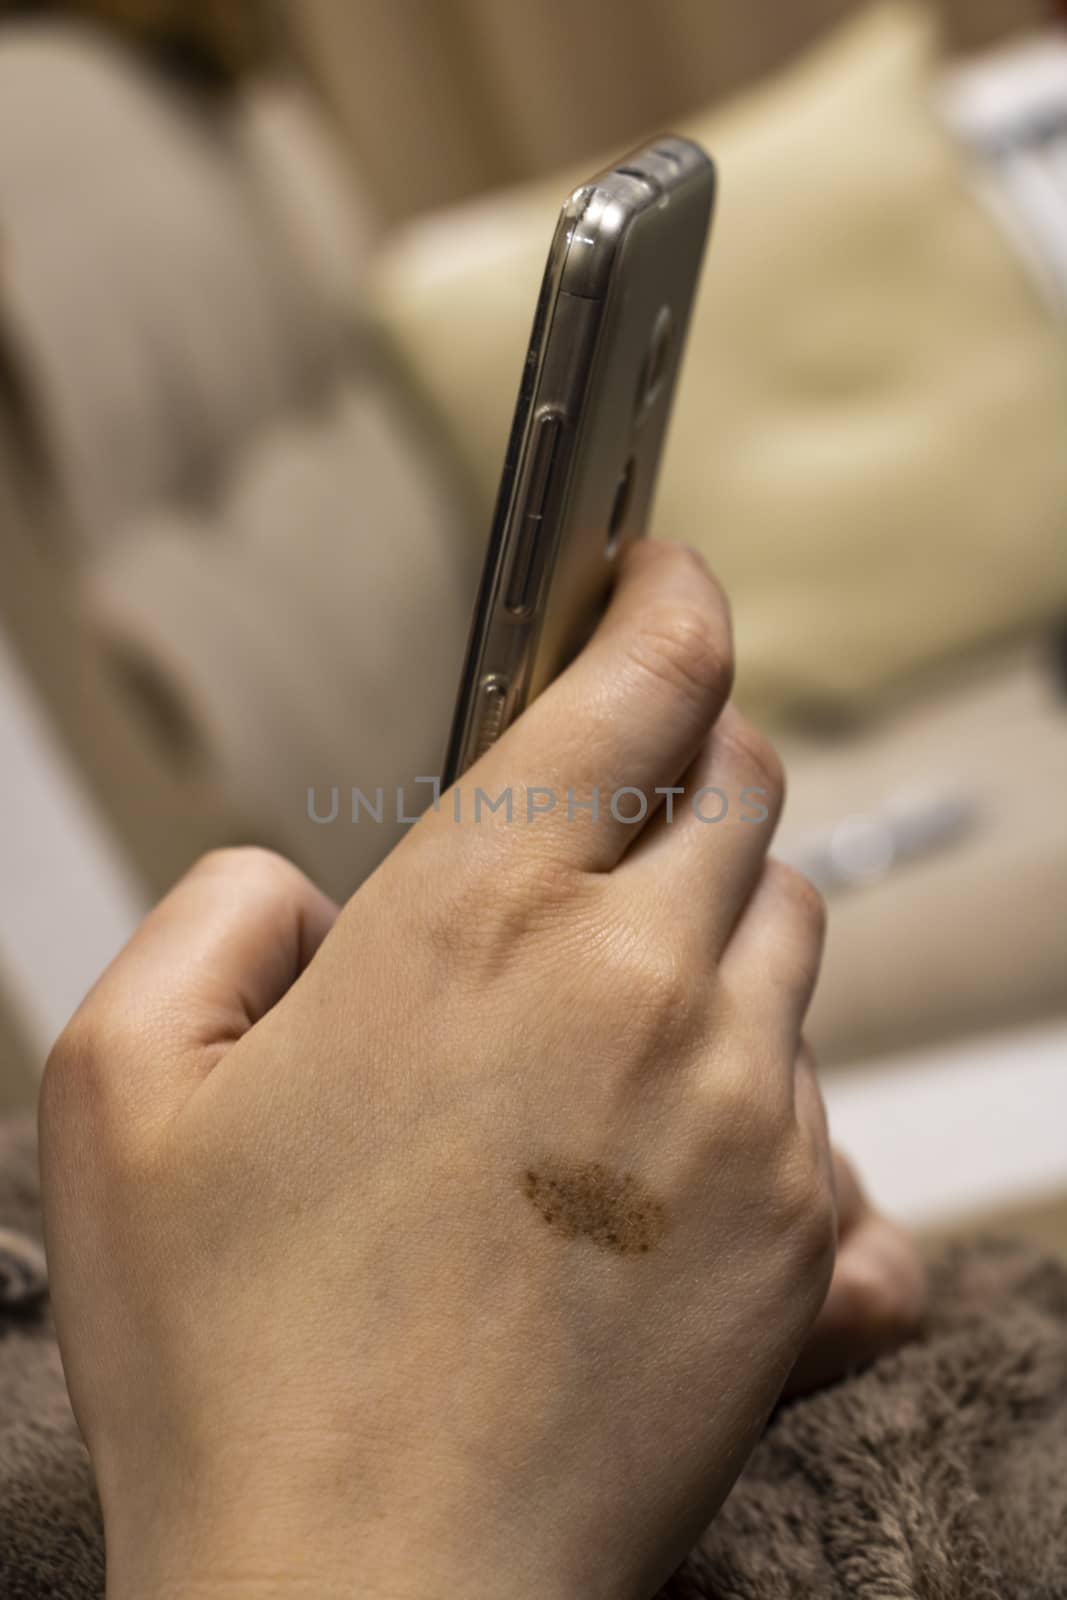 The girl, with a birthmark on her hand, using smart phone